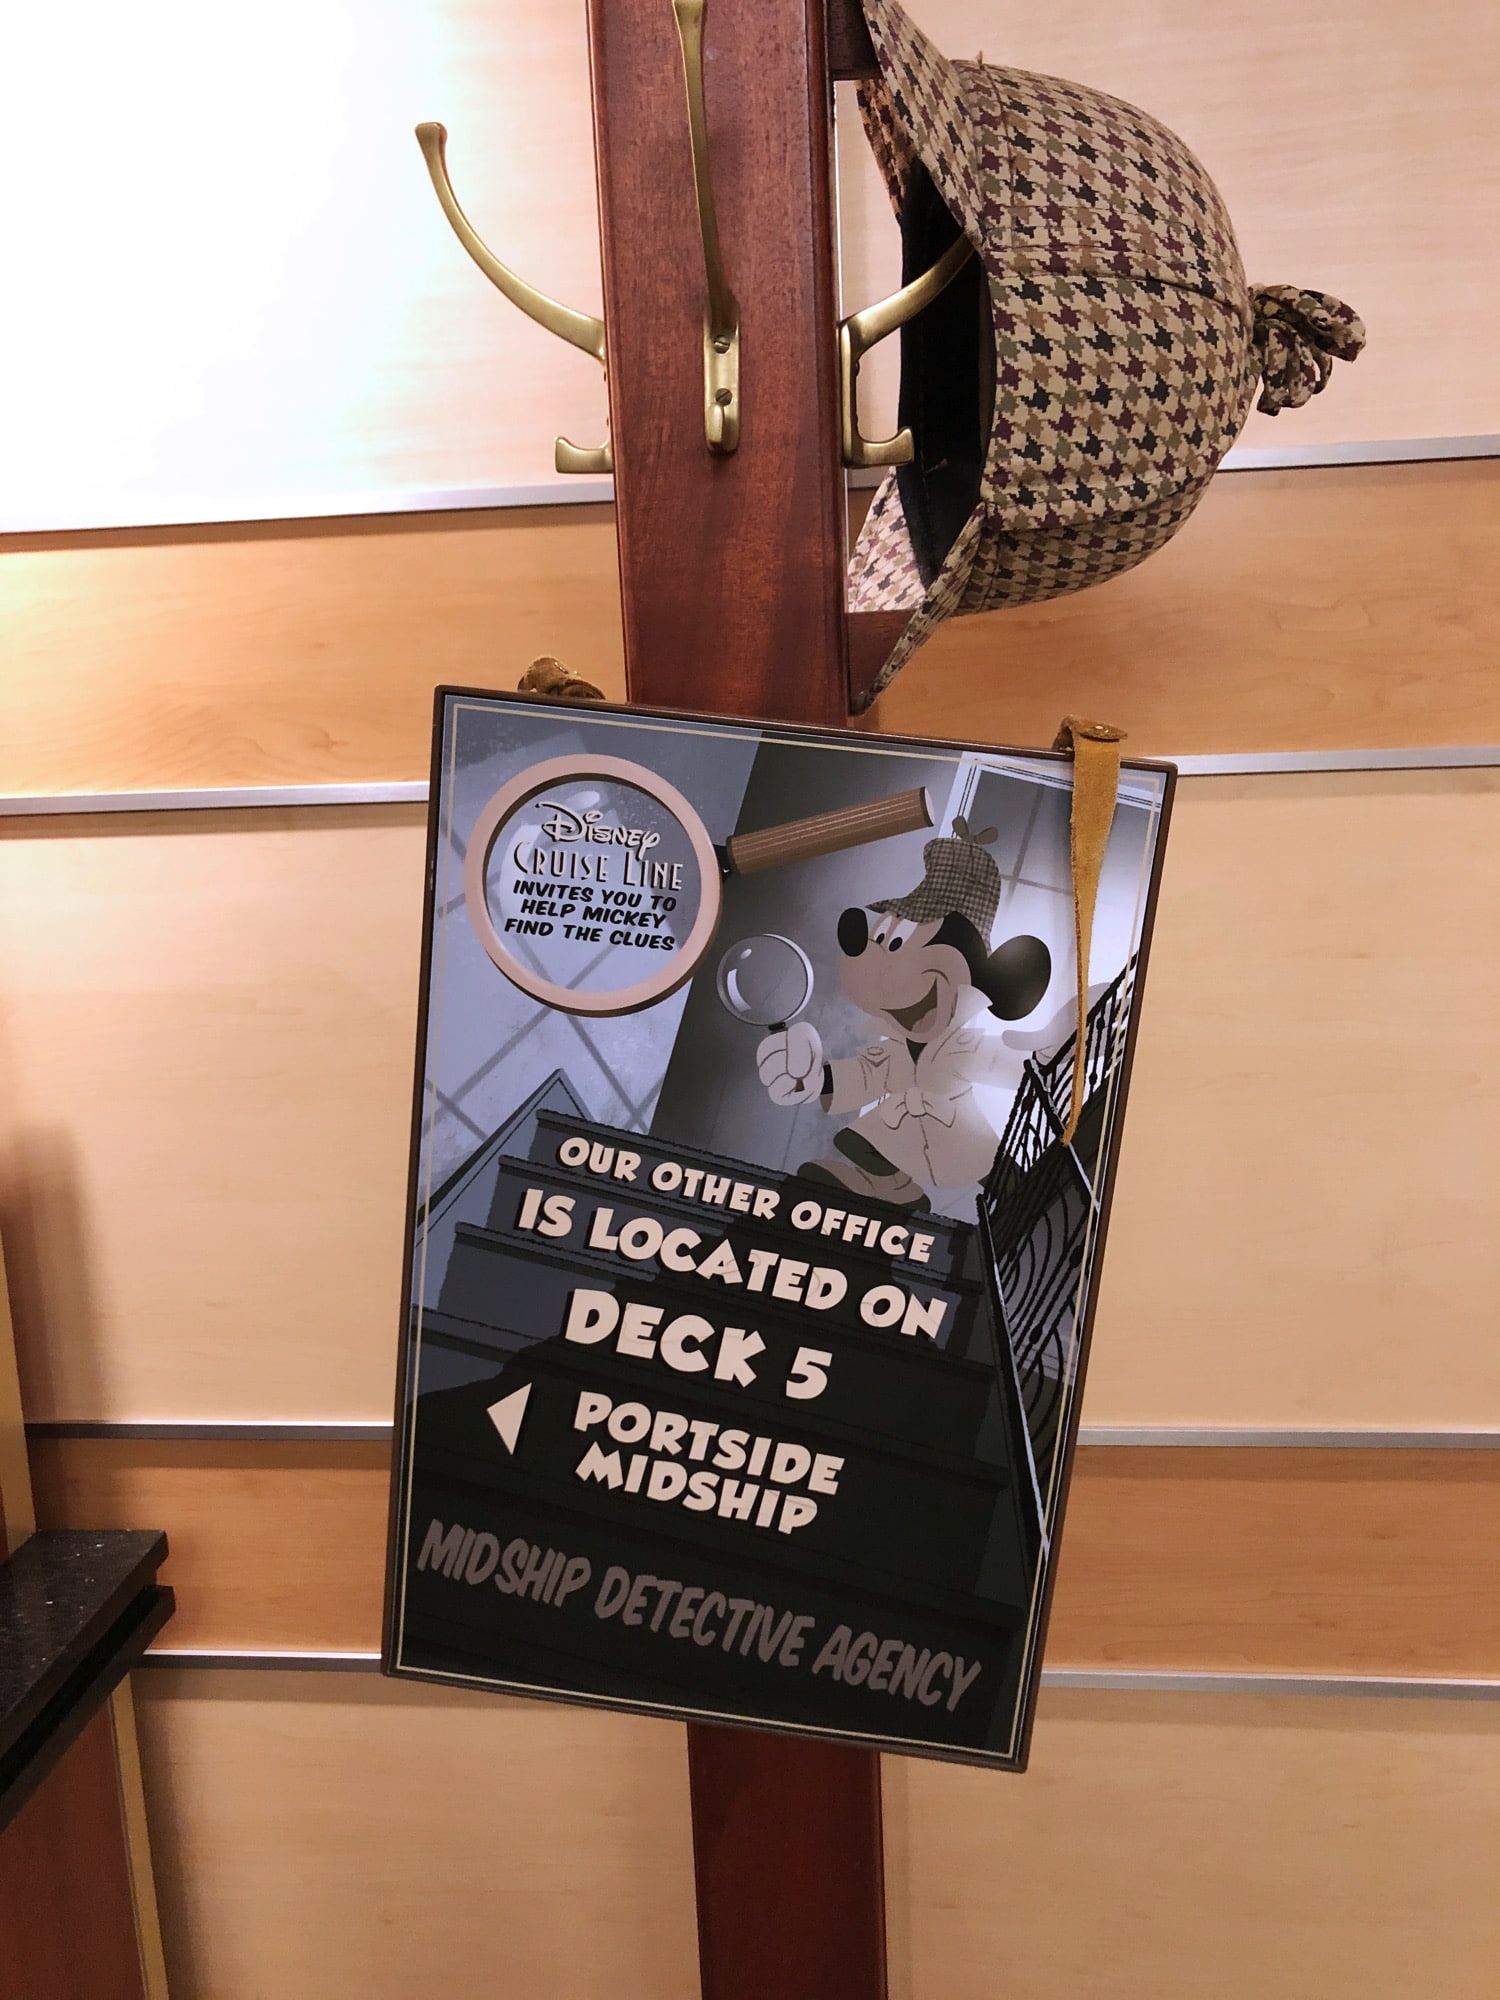 Midship Detective Agency Game on Disney Cruise Line